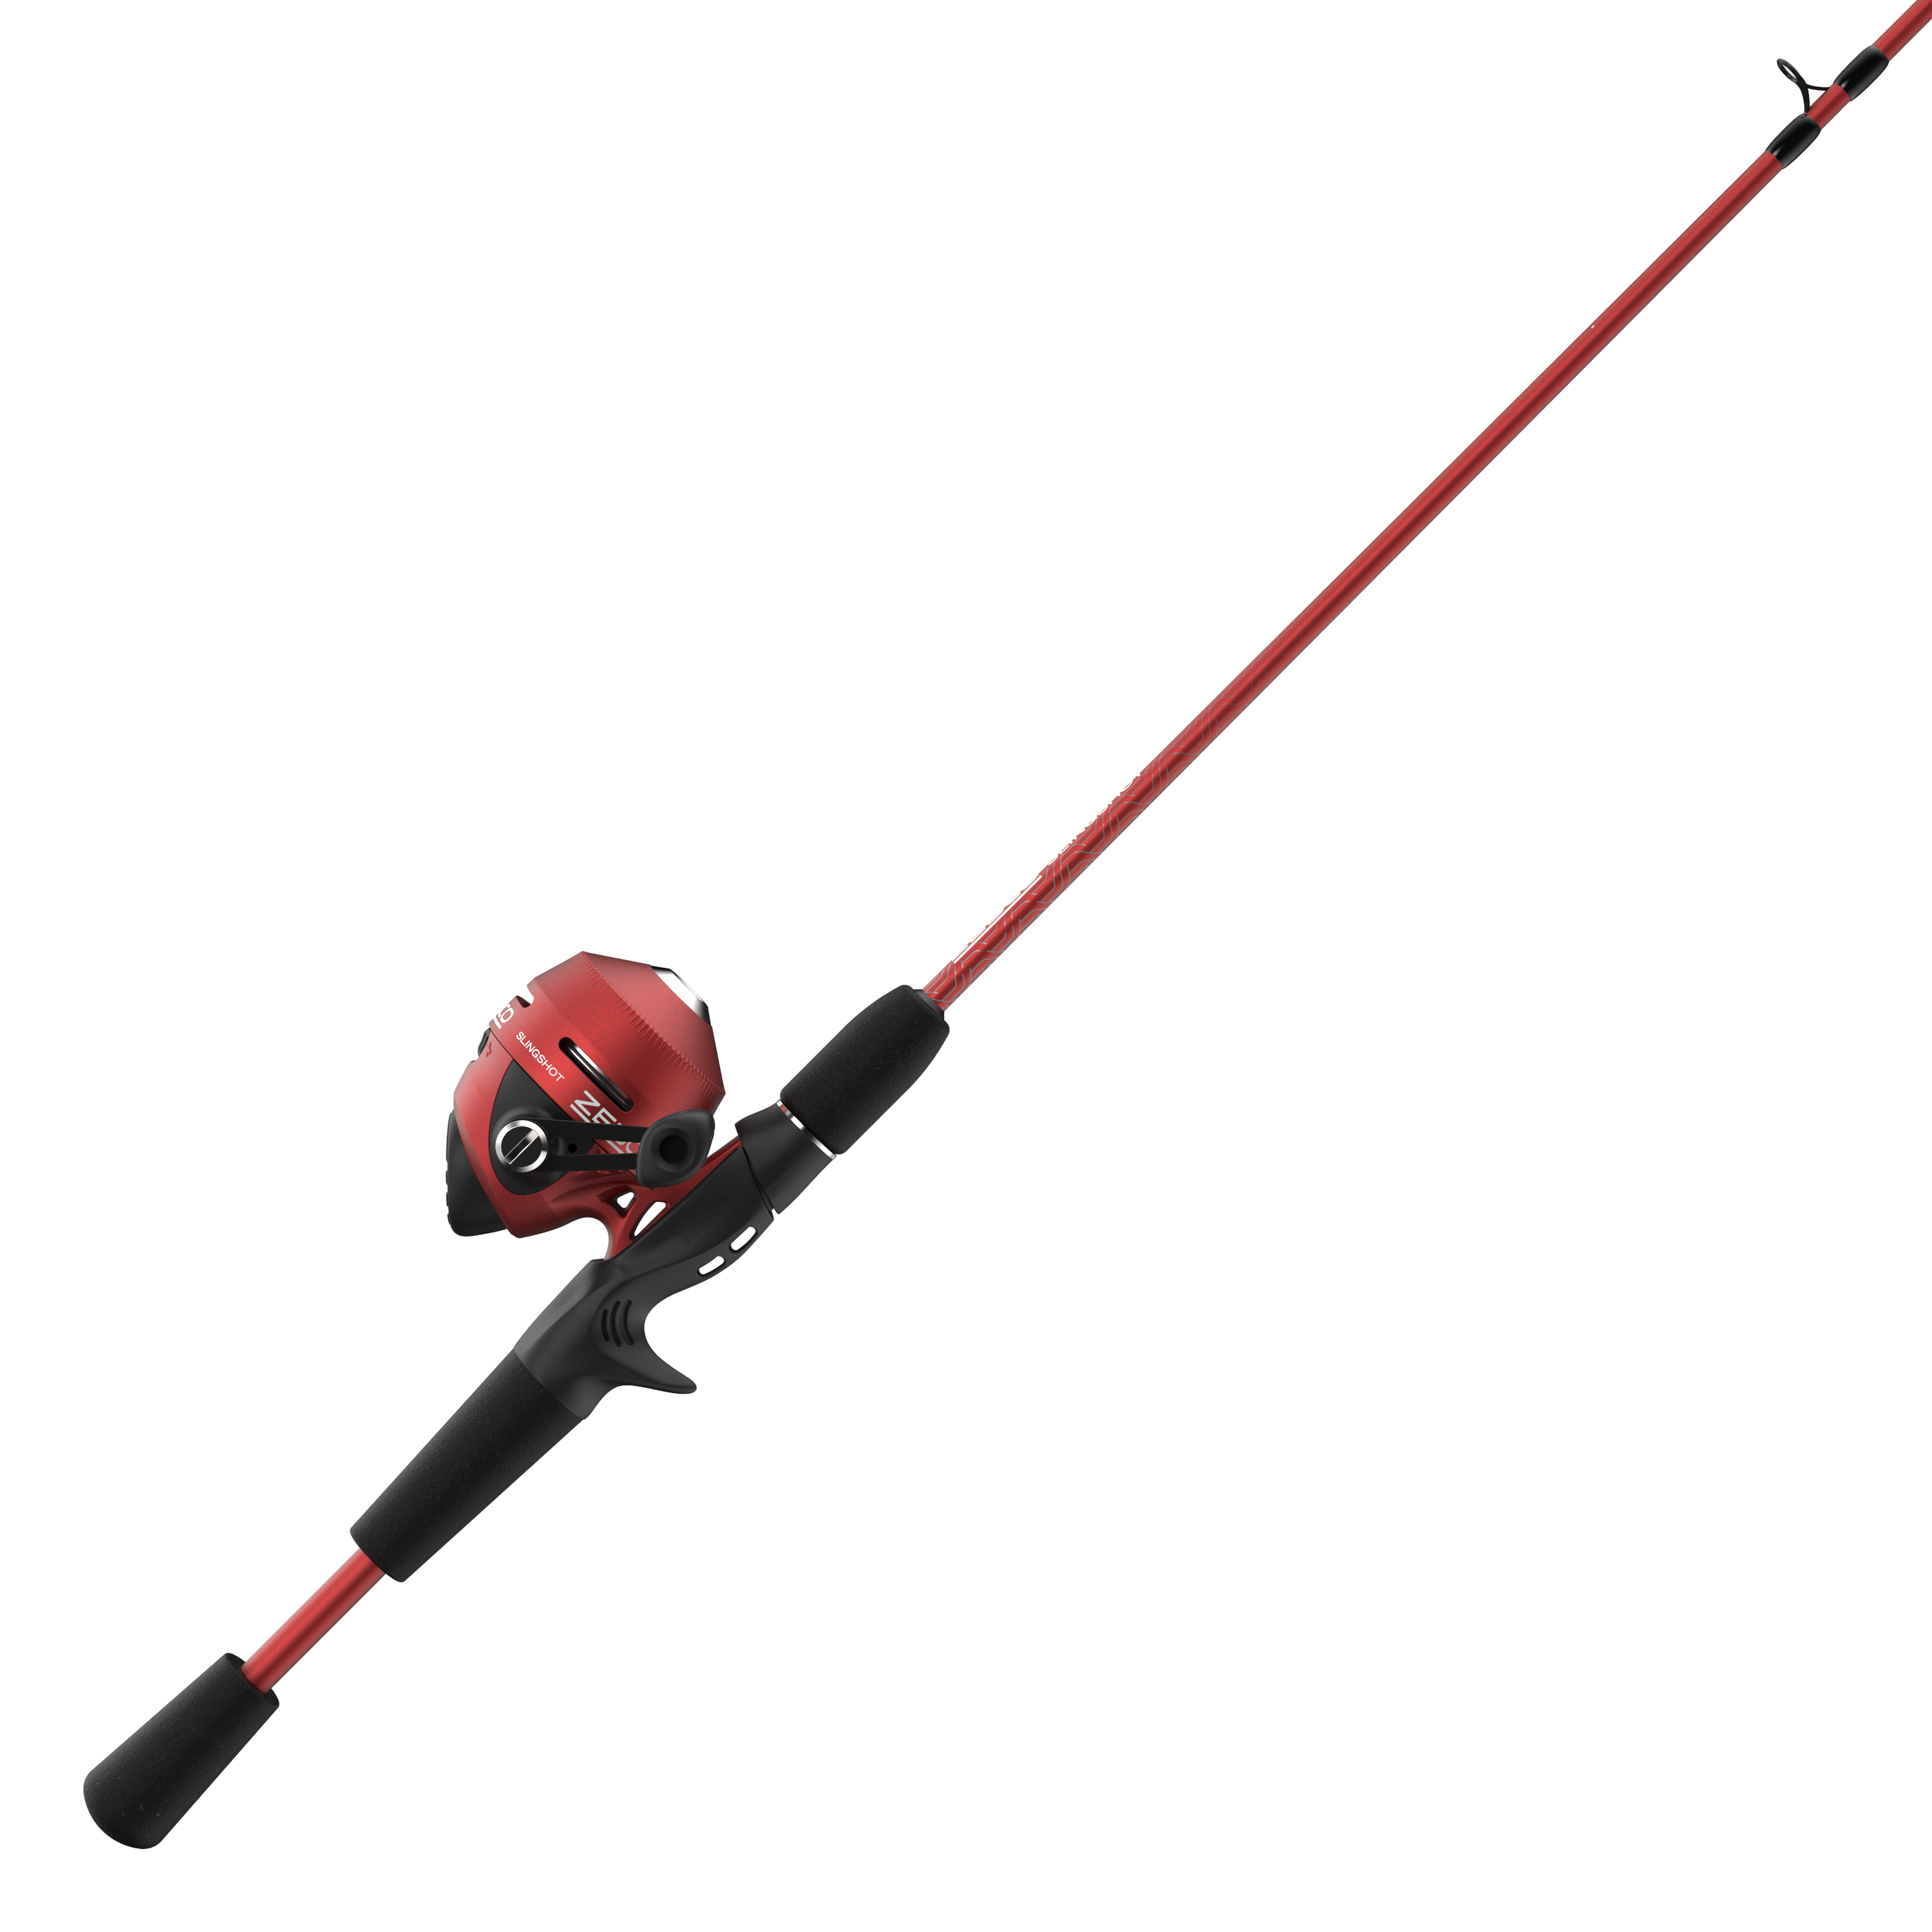 Zebco Roam Telescopic Fishing Rod and Spinning or Spincast Fishing Reel  Combo, Durable 6-Foot Fiberglass Rod with ComfortGrip Handle, Pre-spooled  with